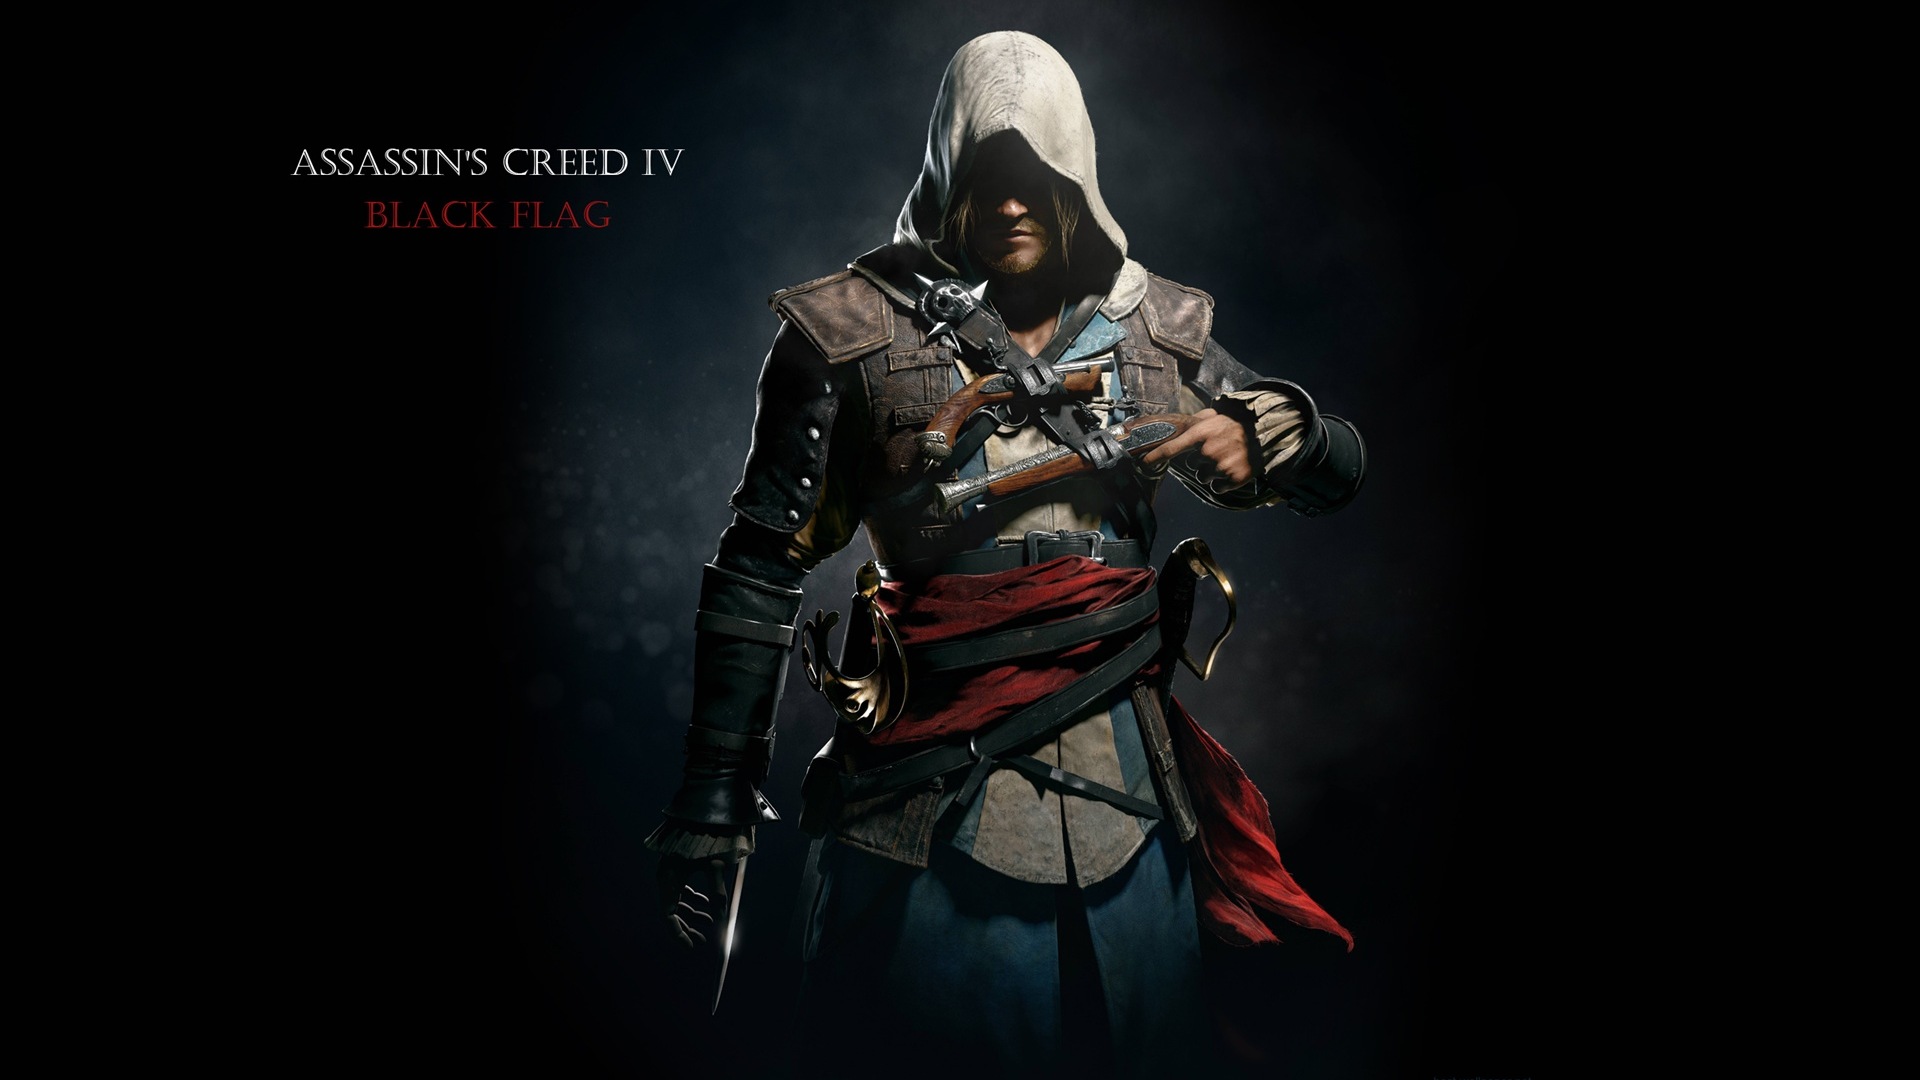 Creed IV Assassin: Black Flag HD wallpapers #9 - 1920x1080